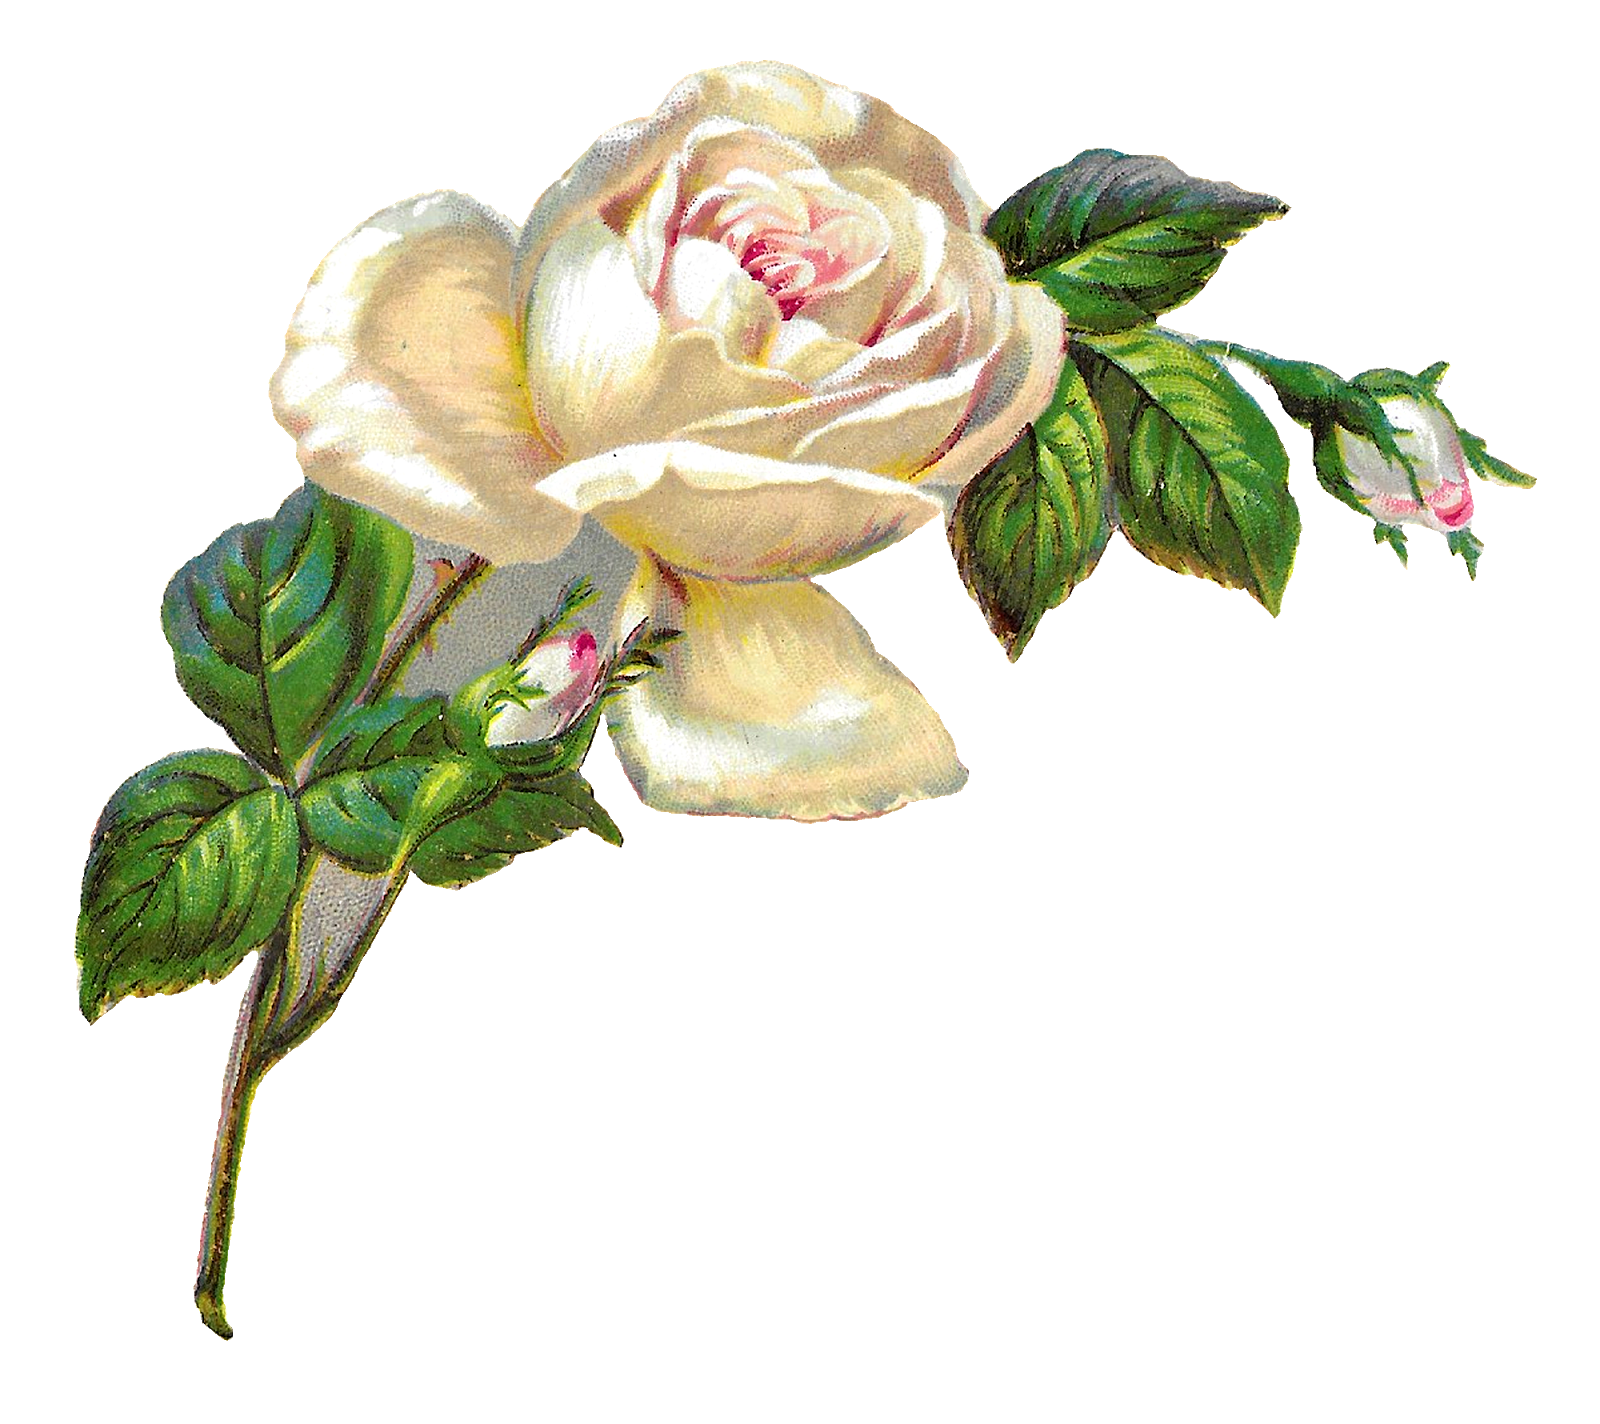 White clipart rose. Antique images shabby chic